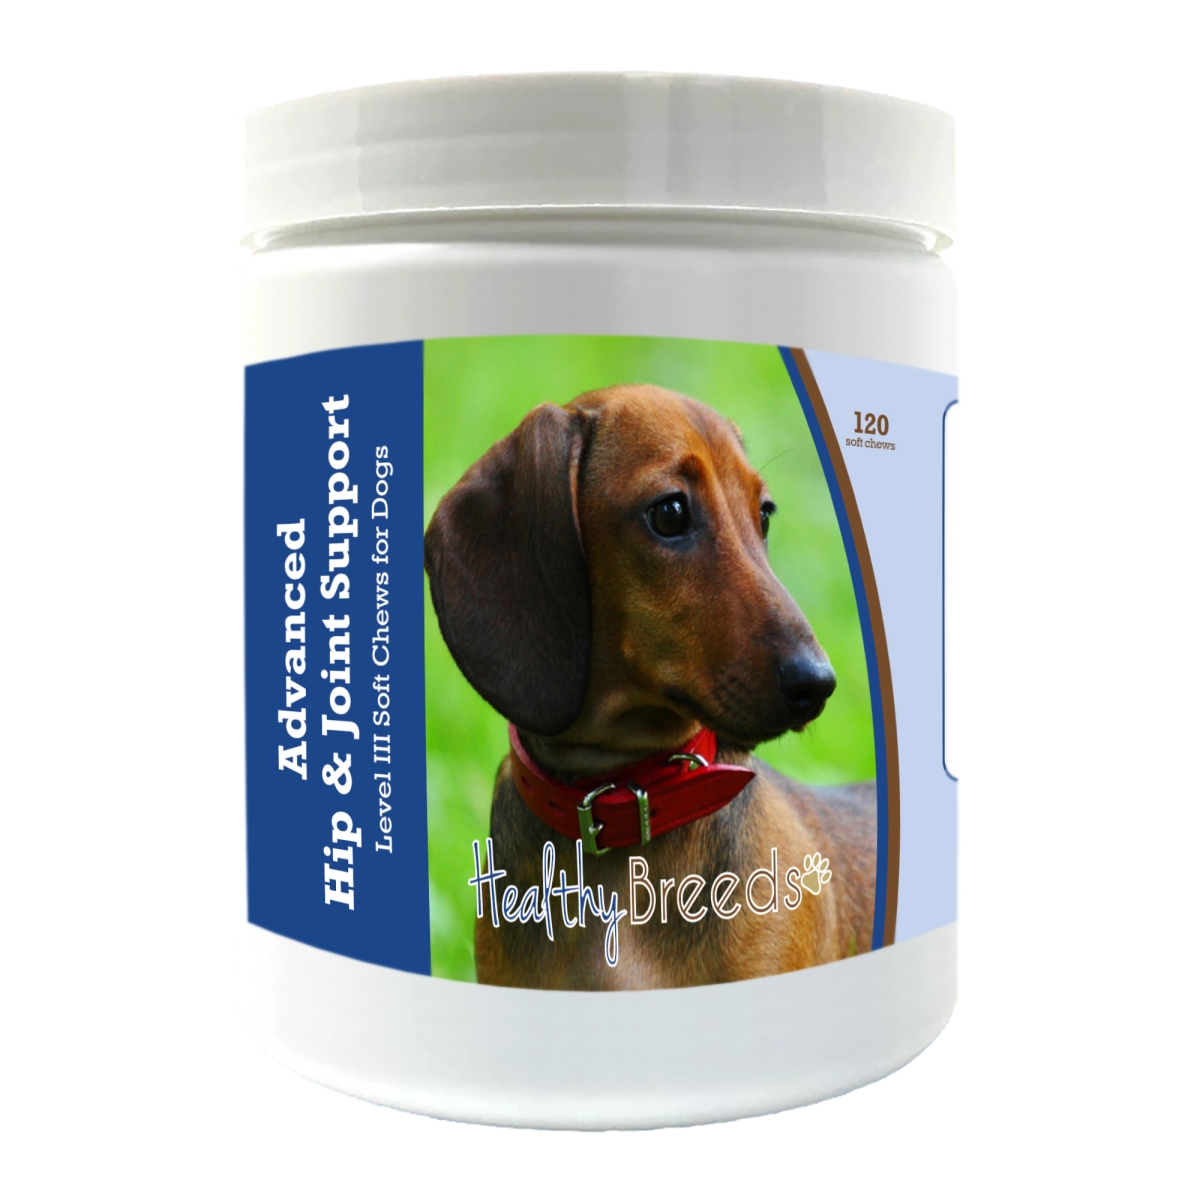 Picture of Healthy Breeds 192959898057 Dachshund Advanced Hip & Joint Support Level III Soft Chews for Dogs